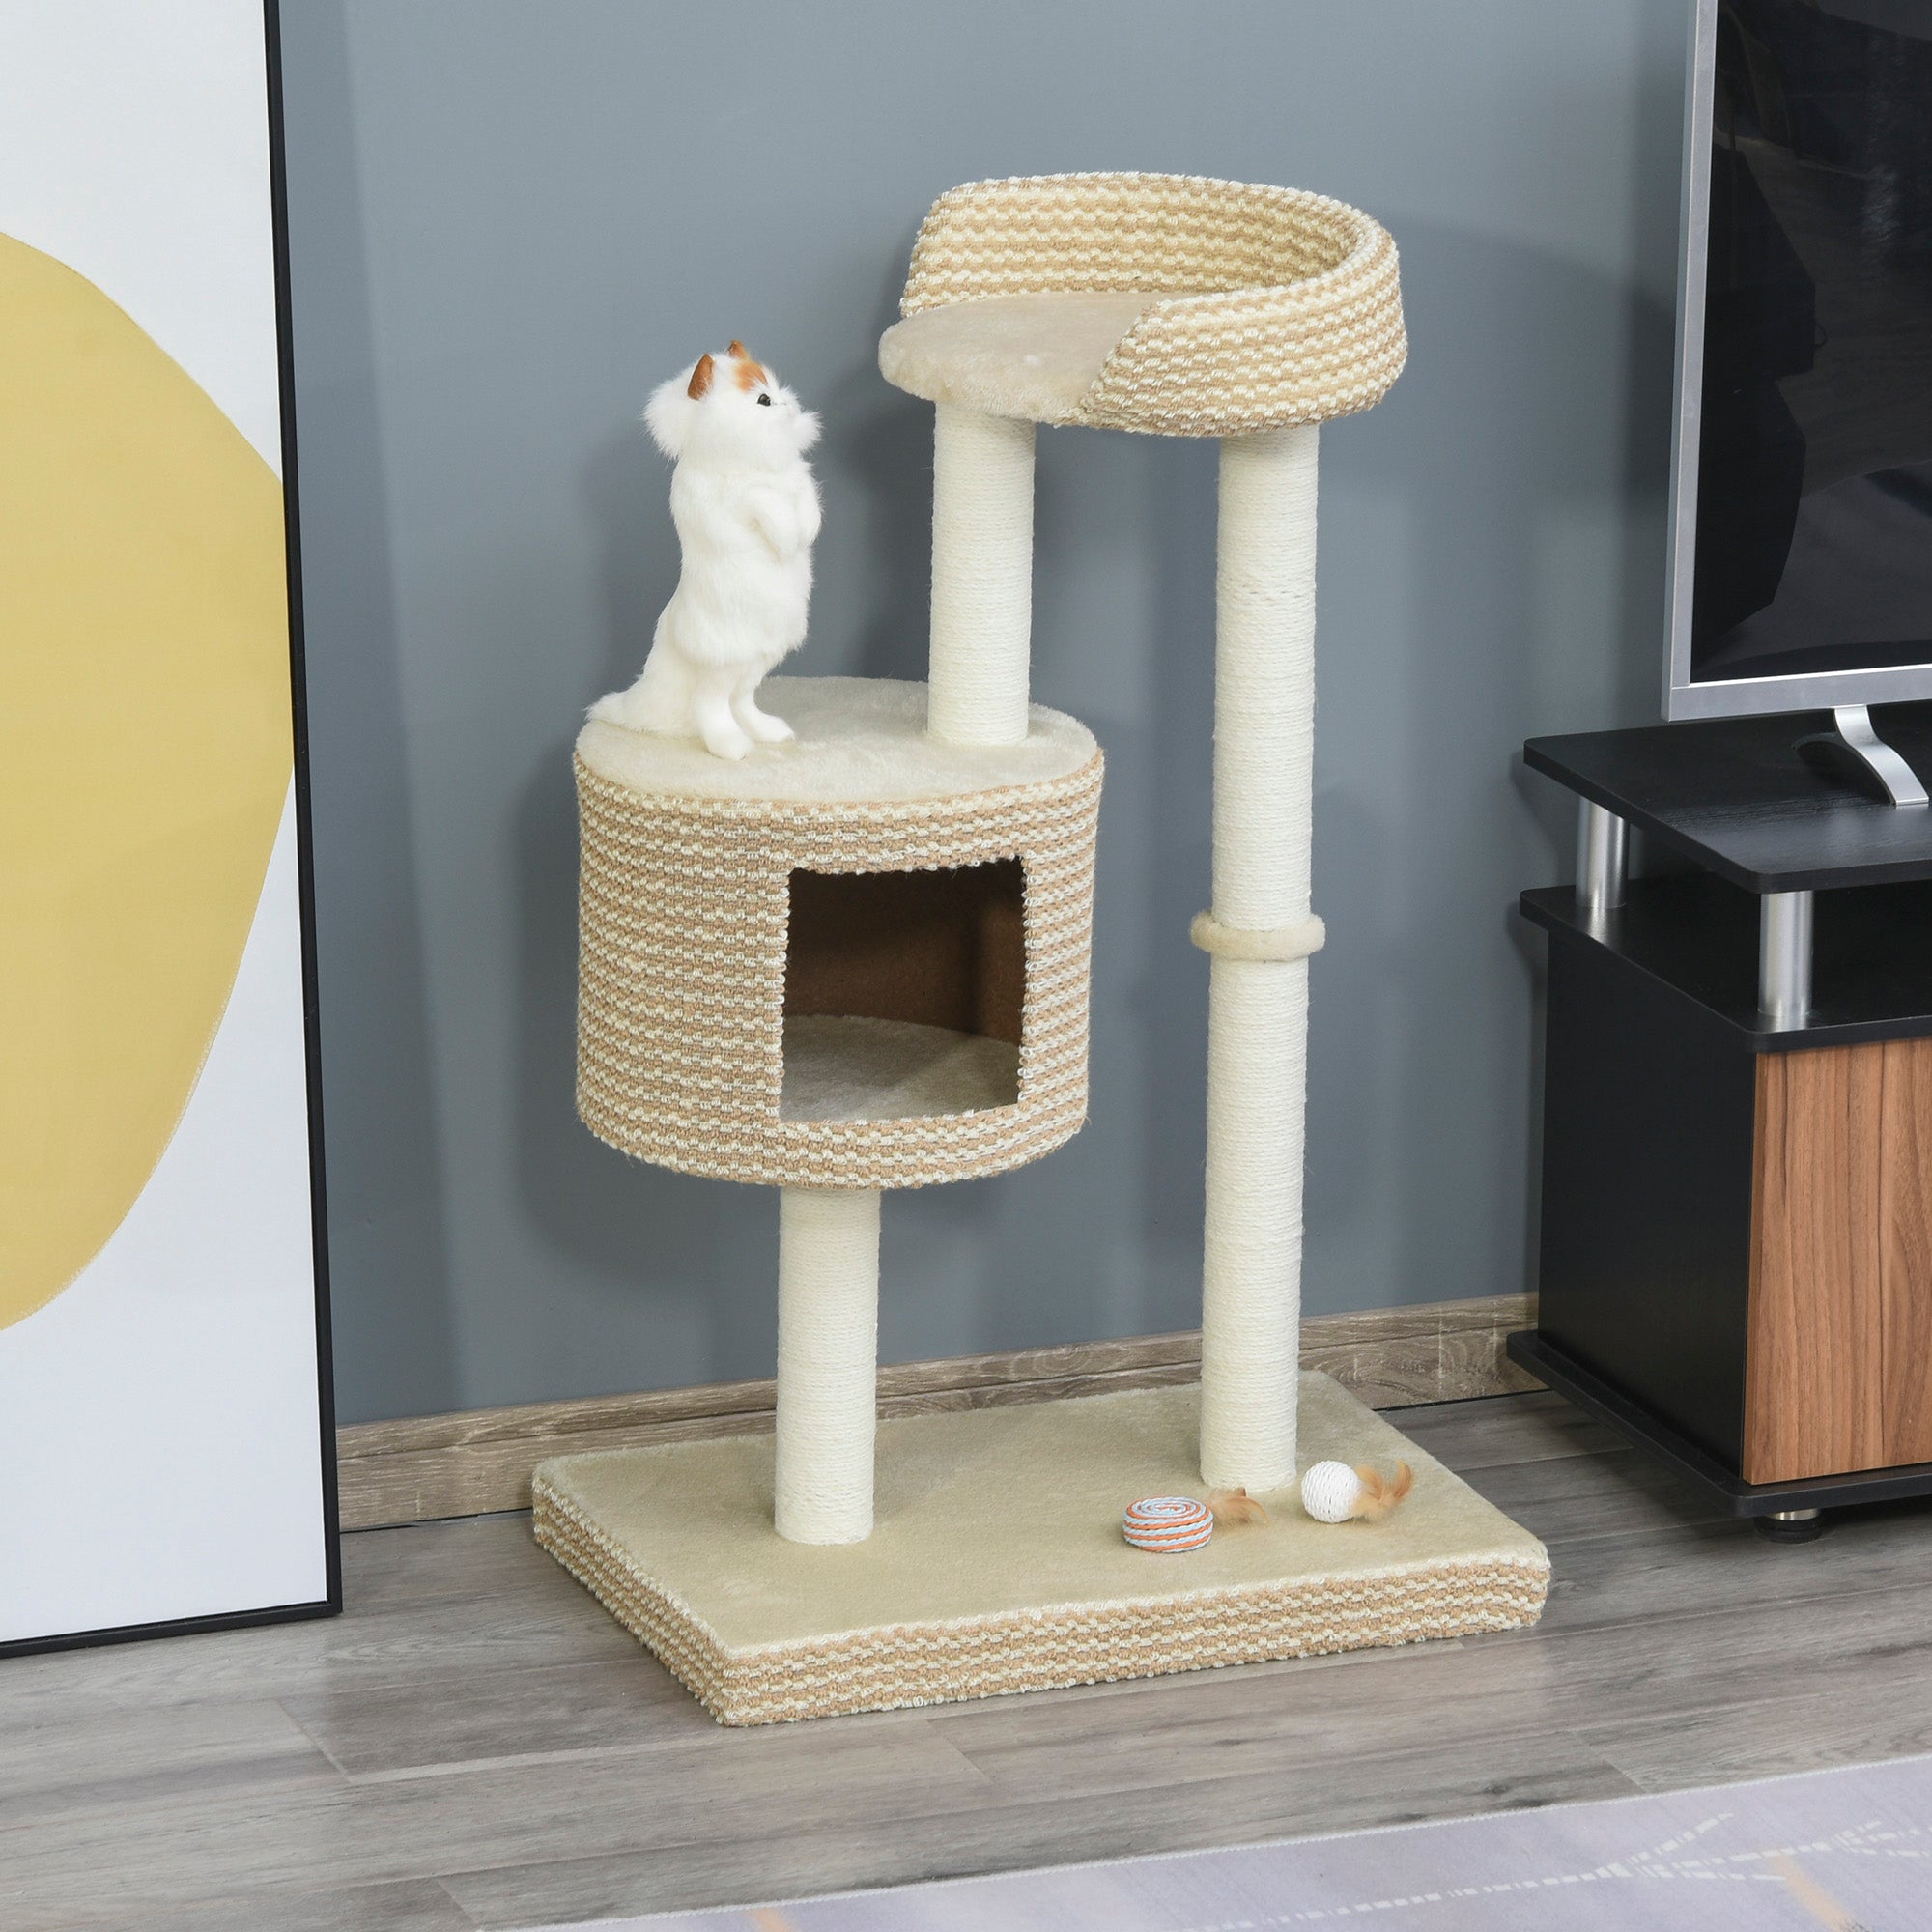 96cm Cat Tree, Cat Condo Tree Tower for Indoor Cats, Cat Activity Centre with Scratching Posts, Plus Perch - Beige, PawHut,